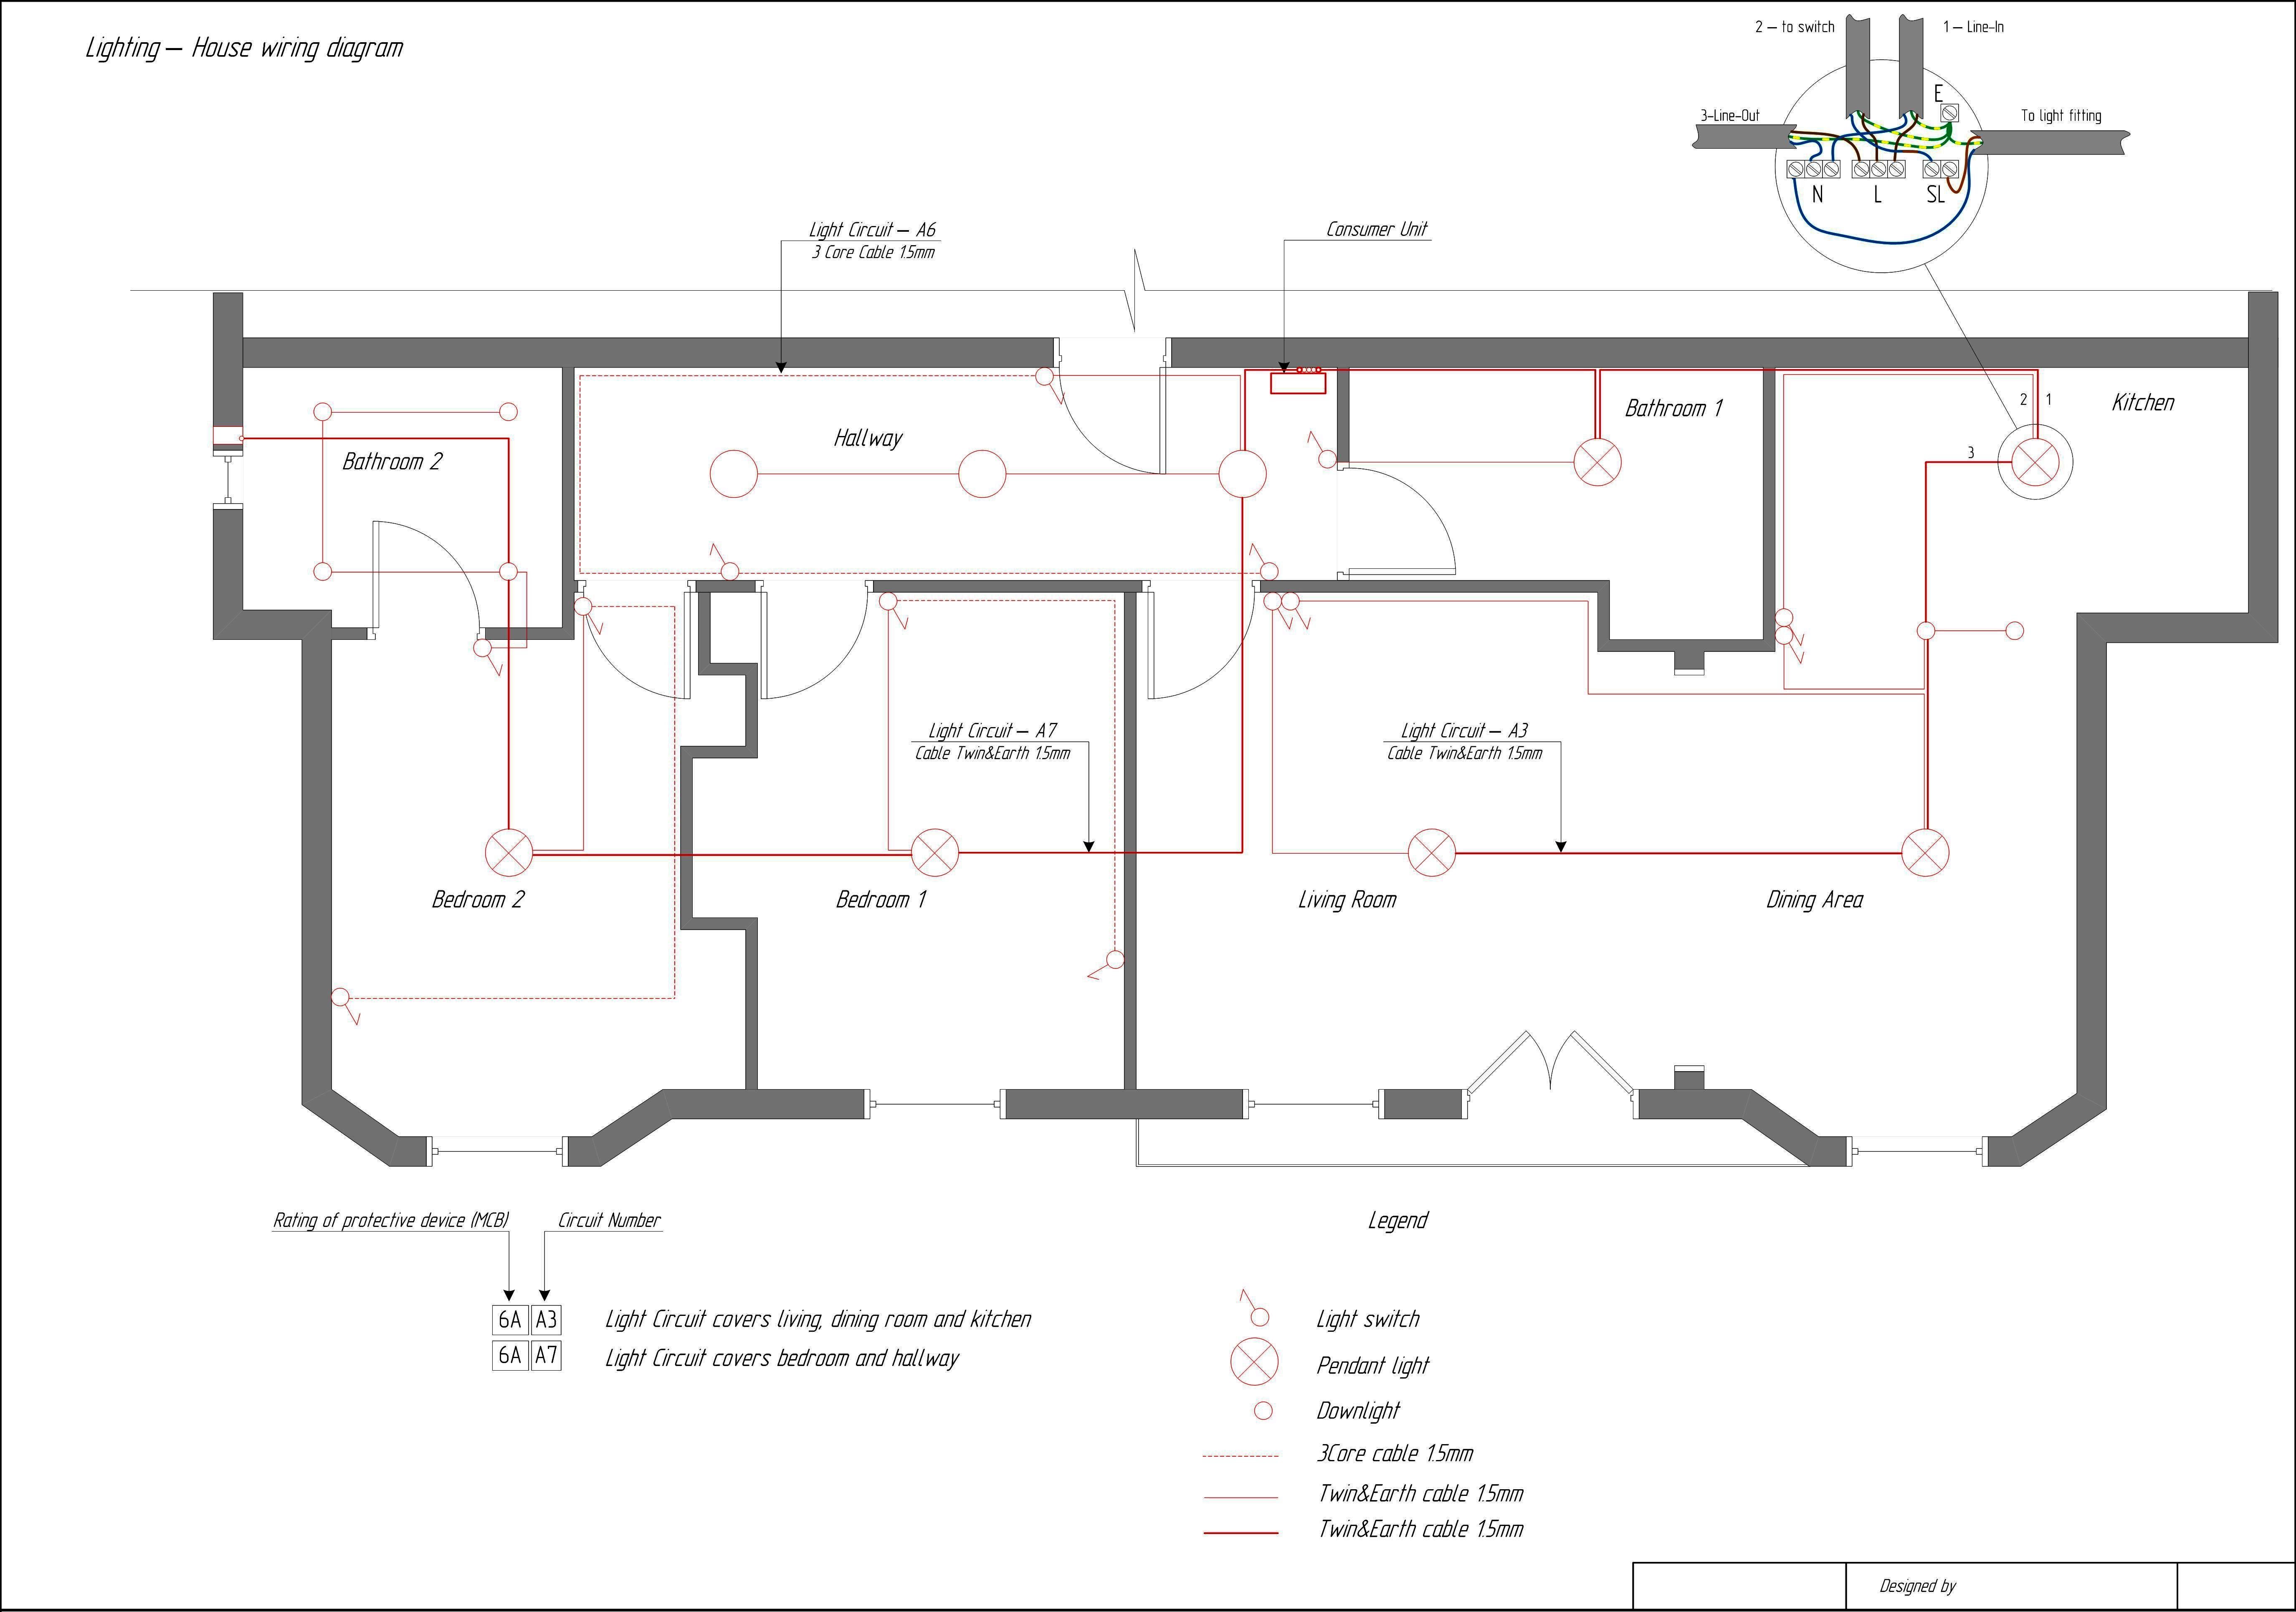 House Wiring Diagram Most monly Used Diagrams For Home Wiring In Wiring A Living Room Bedroom Wiring Diagram